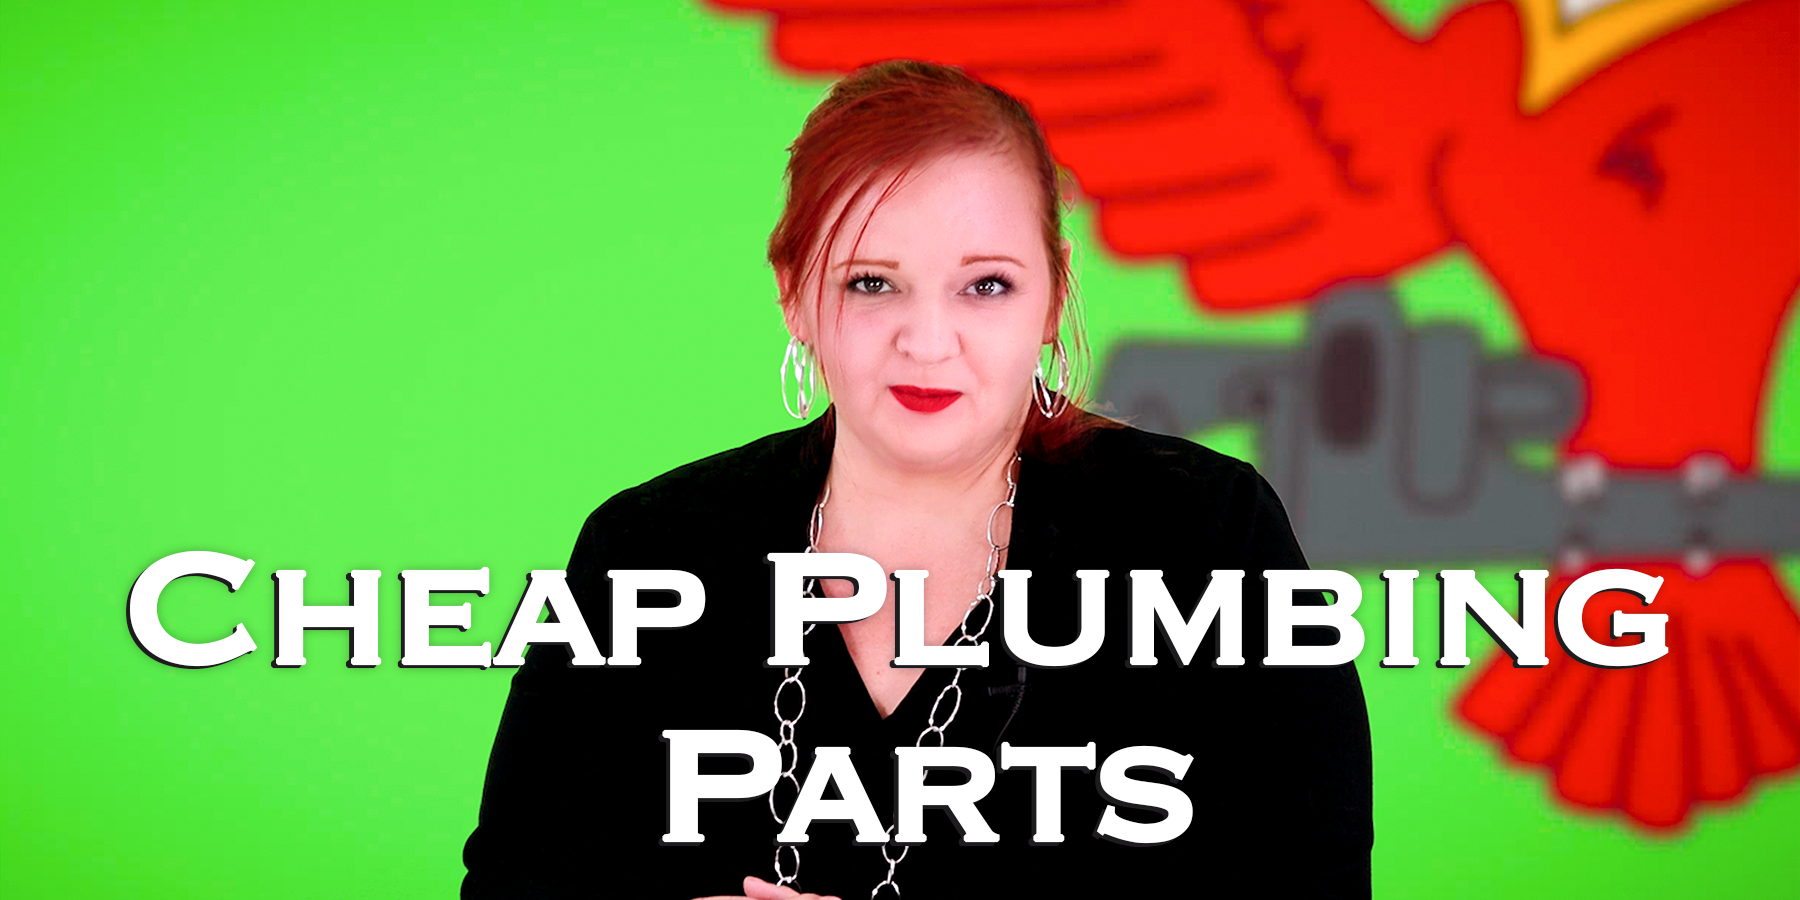 Cover photo for blog "Cheap Plumbing Parts"